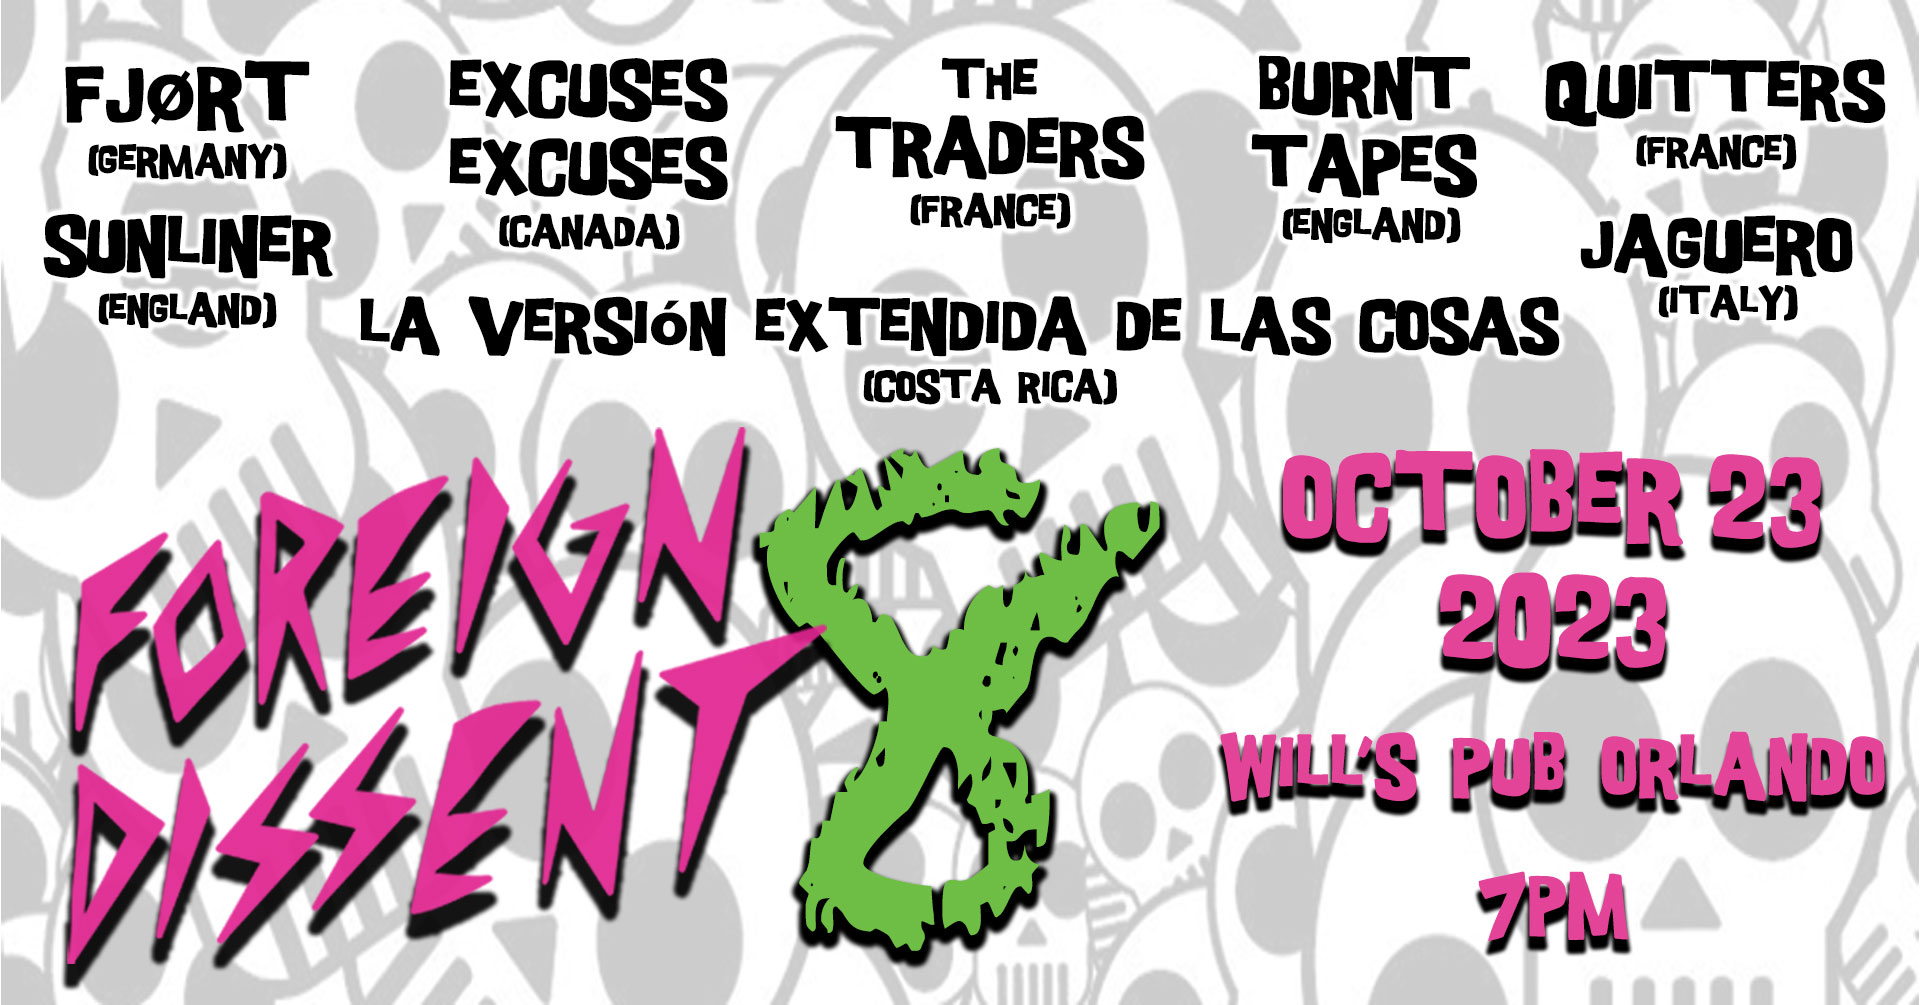 Foreign Dissent 8 is on October 23, 2023 at Will's Pub in Orlando featuring Fjort from Germany, Sunliner from England, Excuses Excuses from Canada, The Traders from France, Burnt Tapes from England, Quitters from France, Jaguero from Italy, and La Versión Extendida de las Cosas from Costa Rica